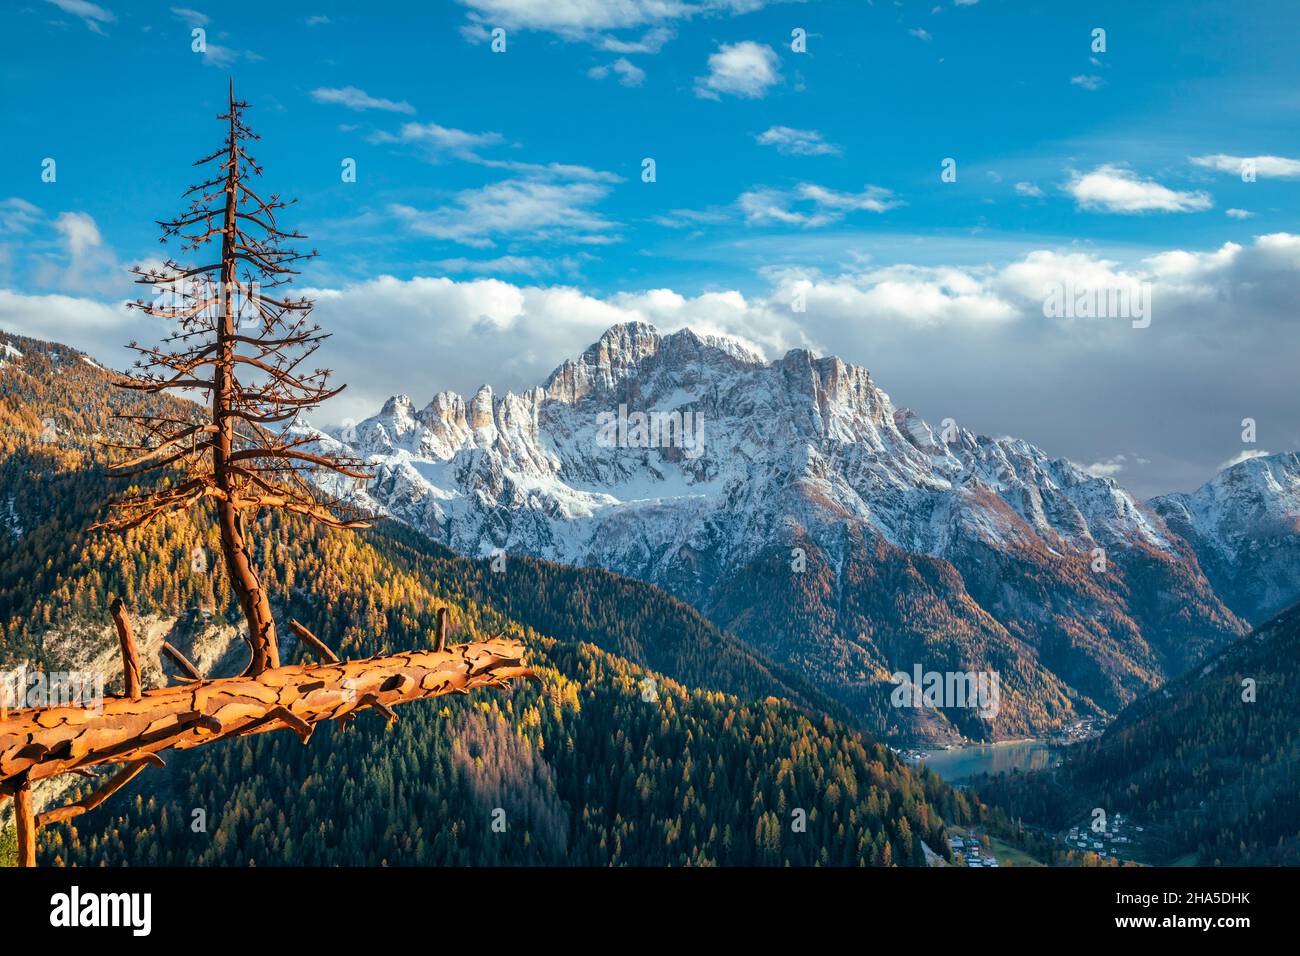 a view of monte civetta from the belvedere of colle santa lucia,with the iron sculpture by valentino moro to symbolize the rebirth after the vaia storm that destroyed hectares of wood in the dolomites,colle santa lucia,belluno,veneto,italy Stock Photo